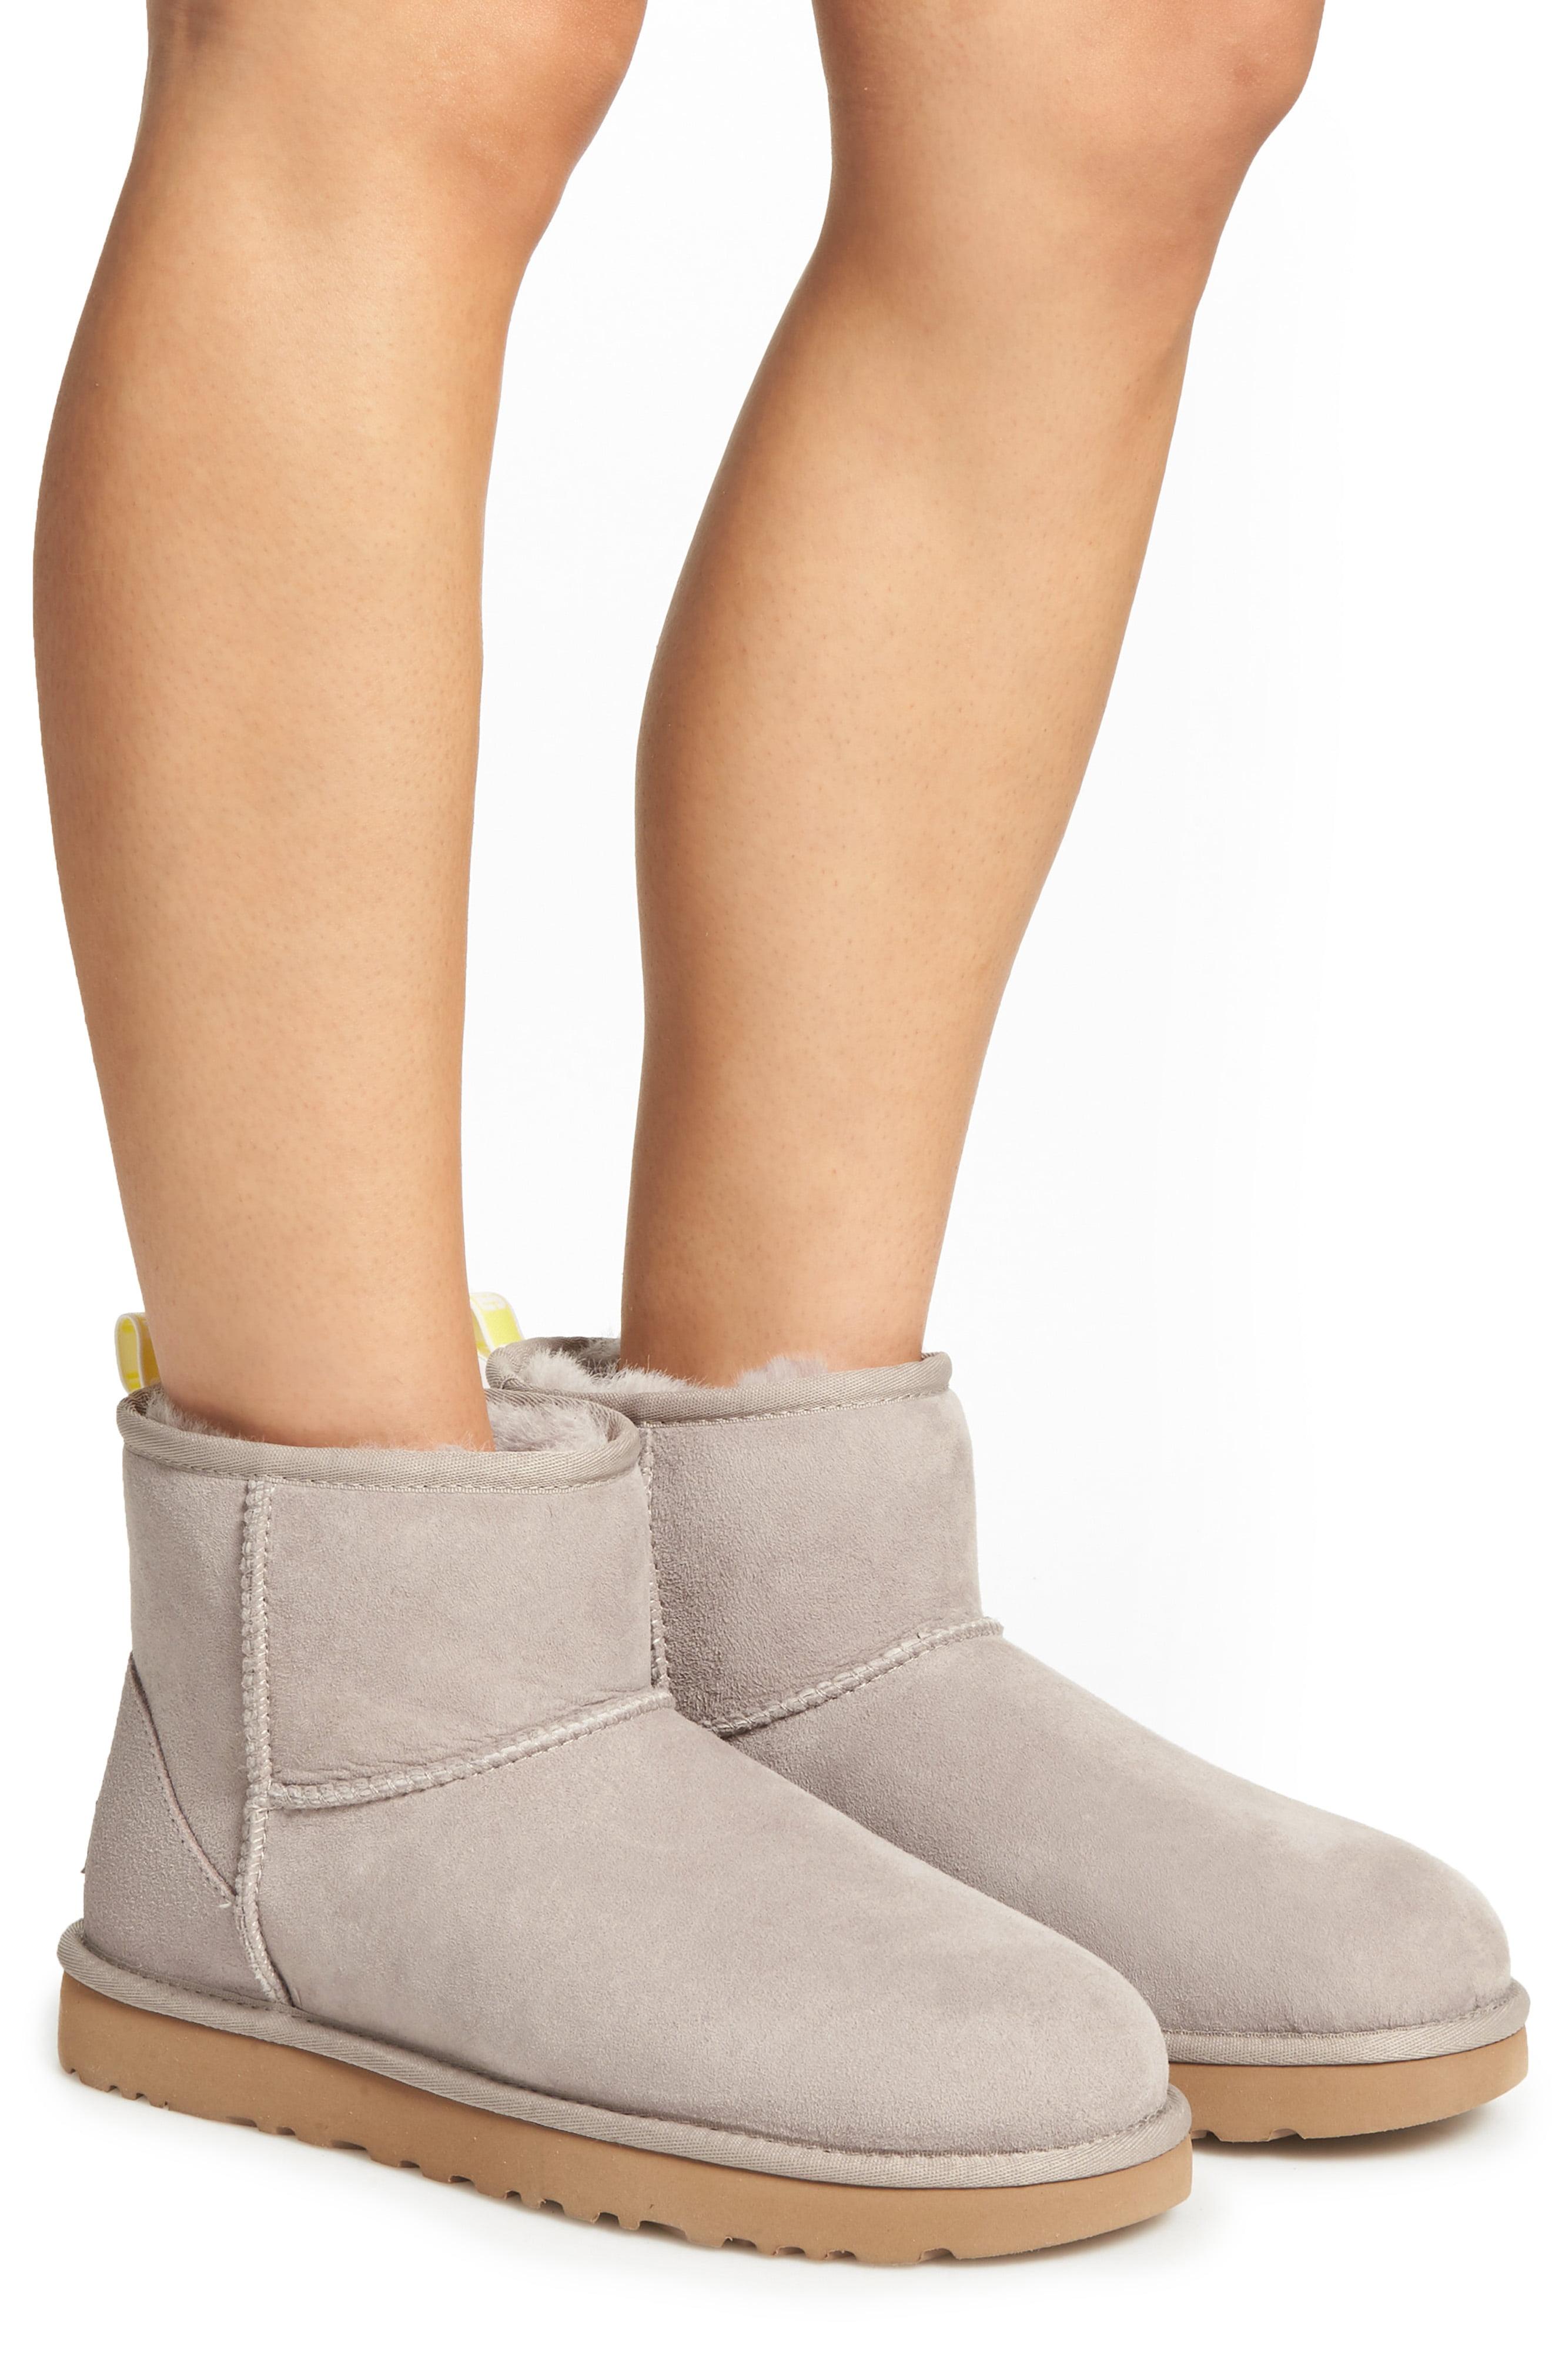 ugg classic mini oyster - dsvdedommel 